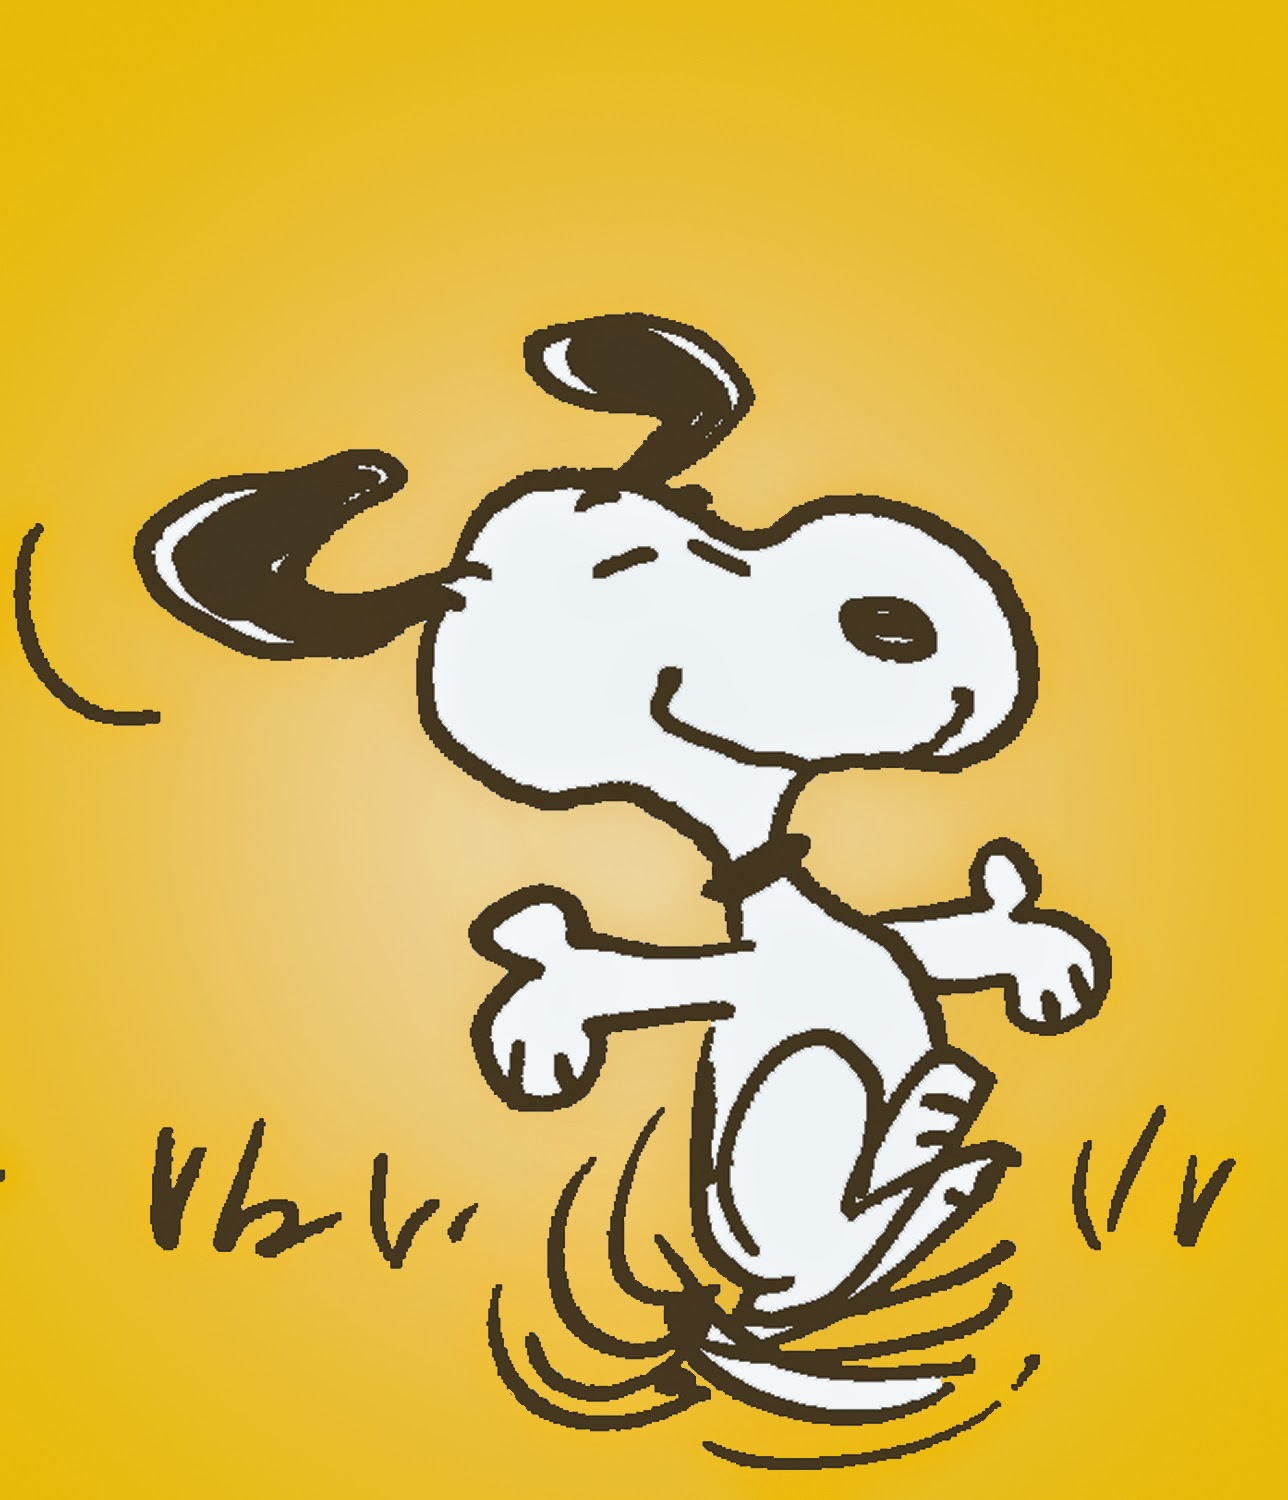 Curator's Corner: The Peanuts are coming to the Keller Gallery!!